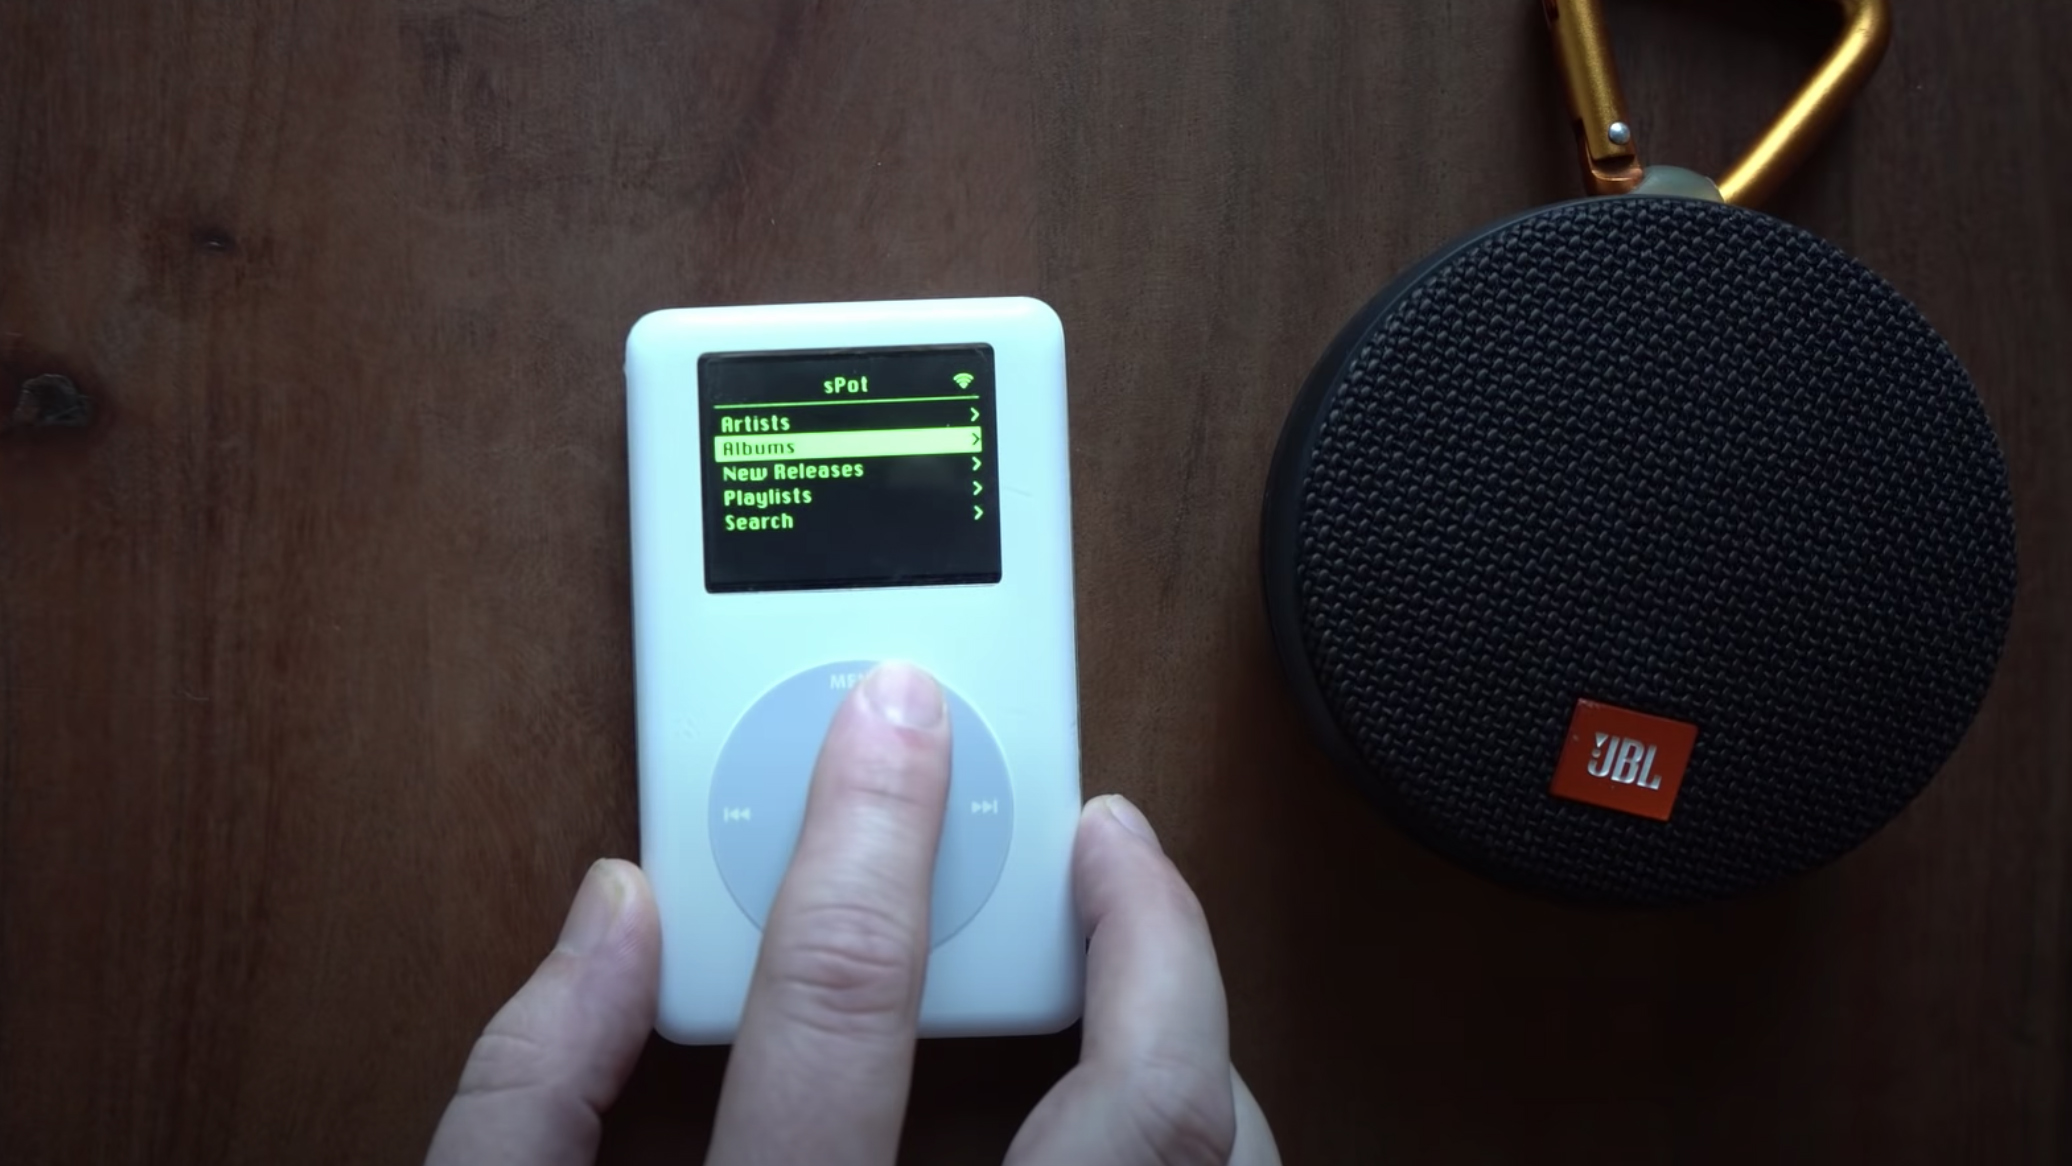 This Modified Ipod Classic Now Has Wi-Fi, Bluetooth And Spotify Streaming | What Hi-Fi?